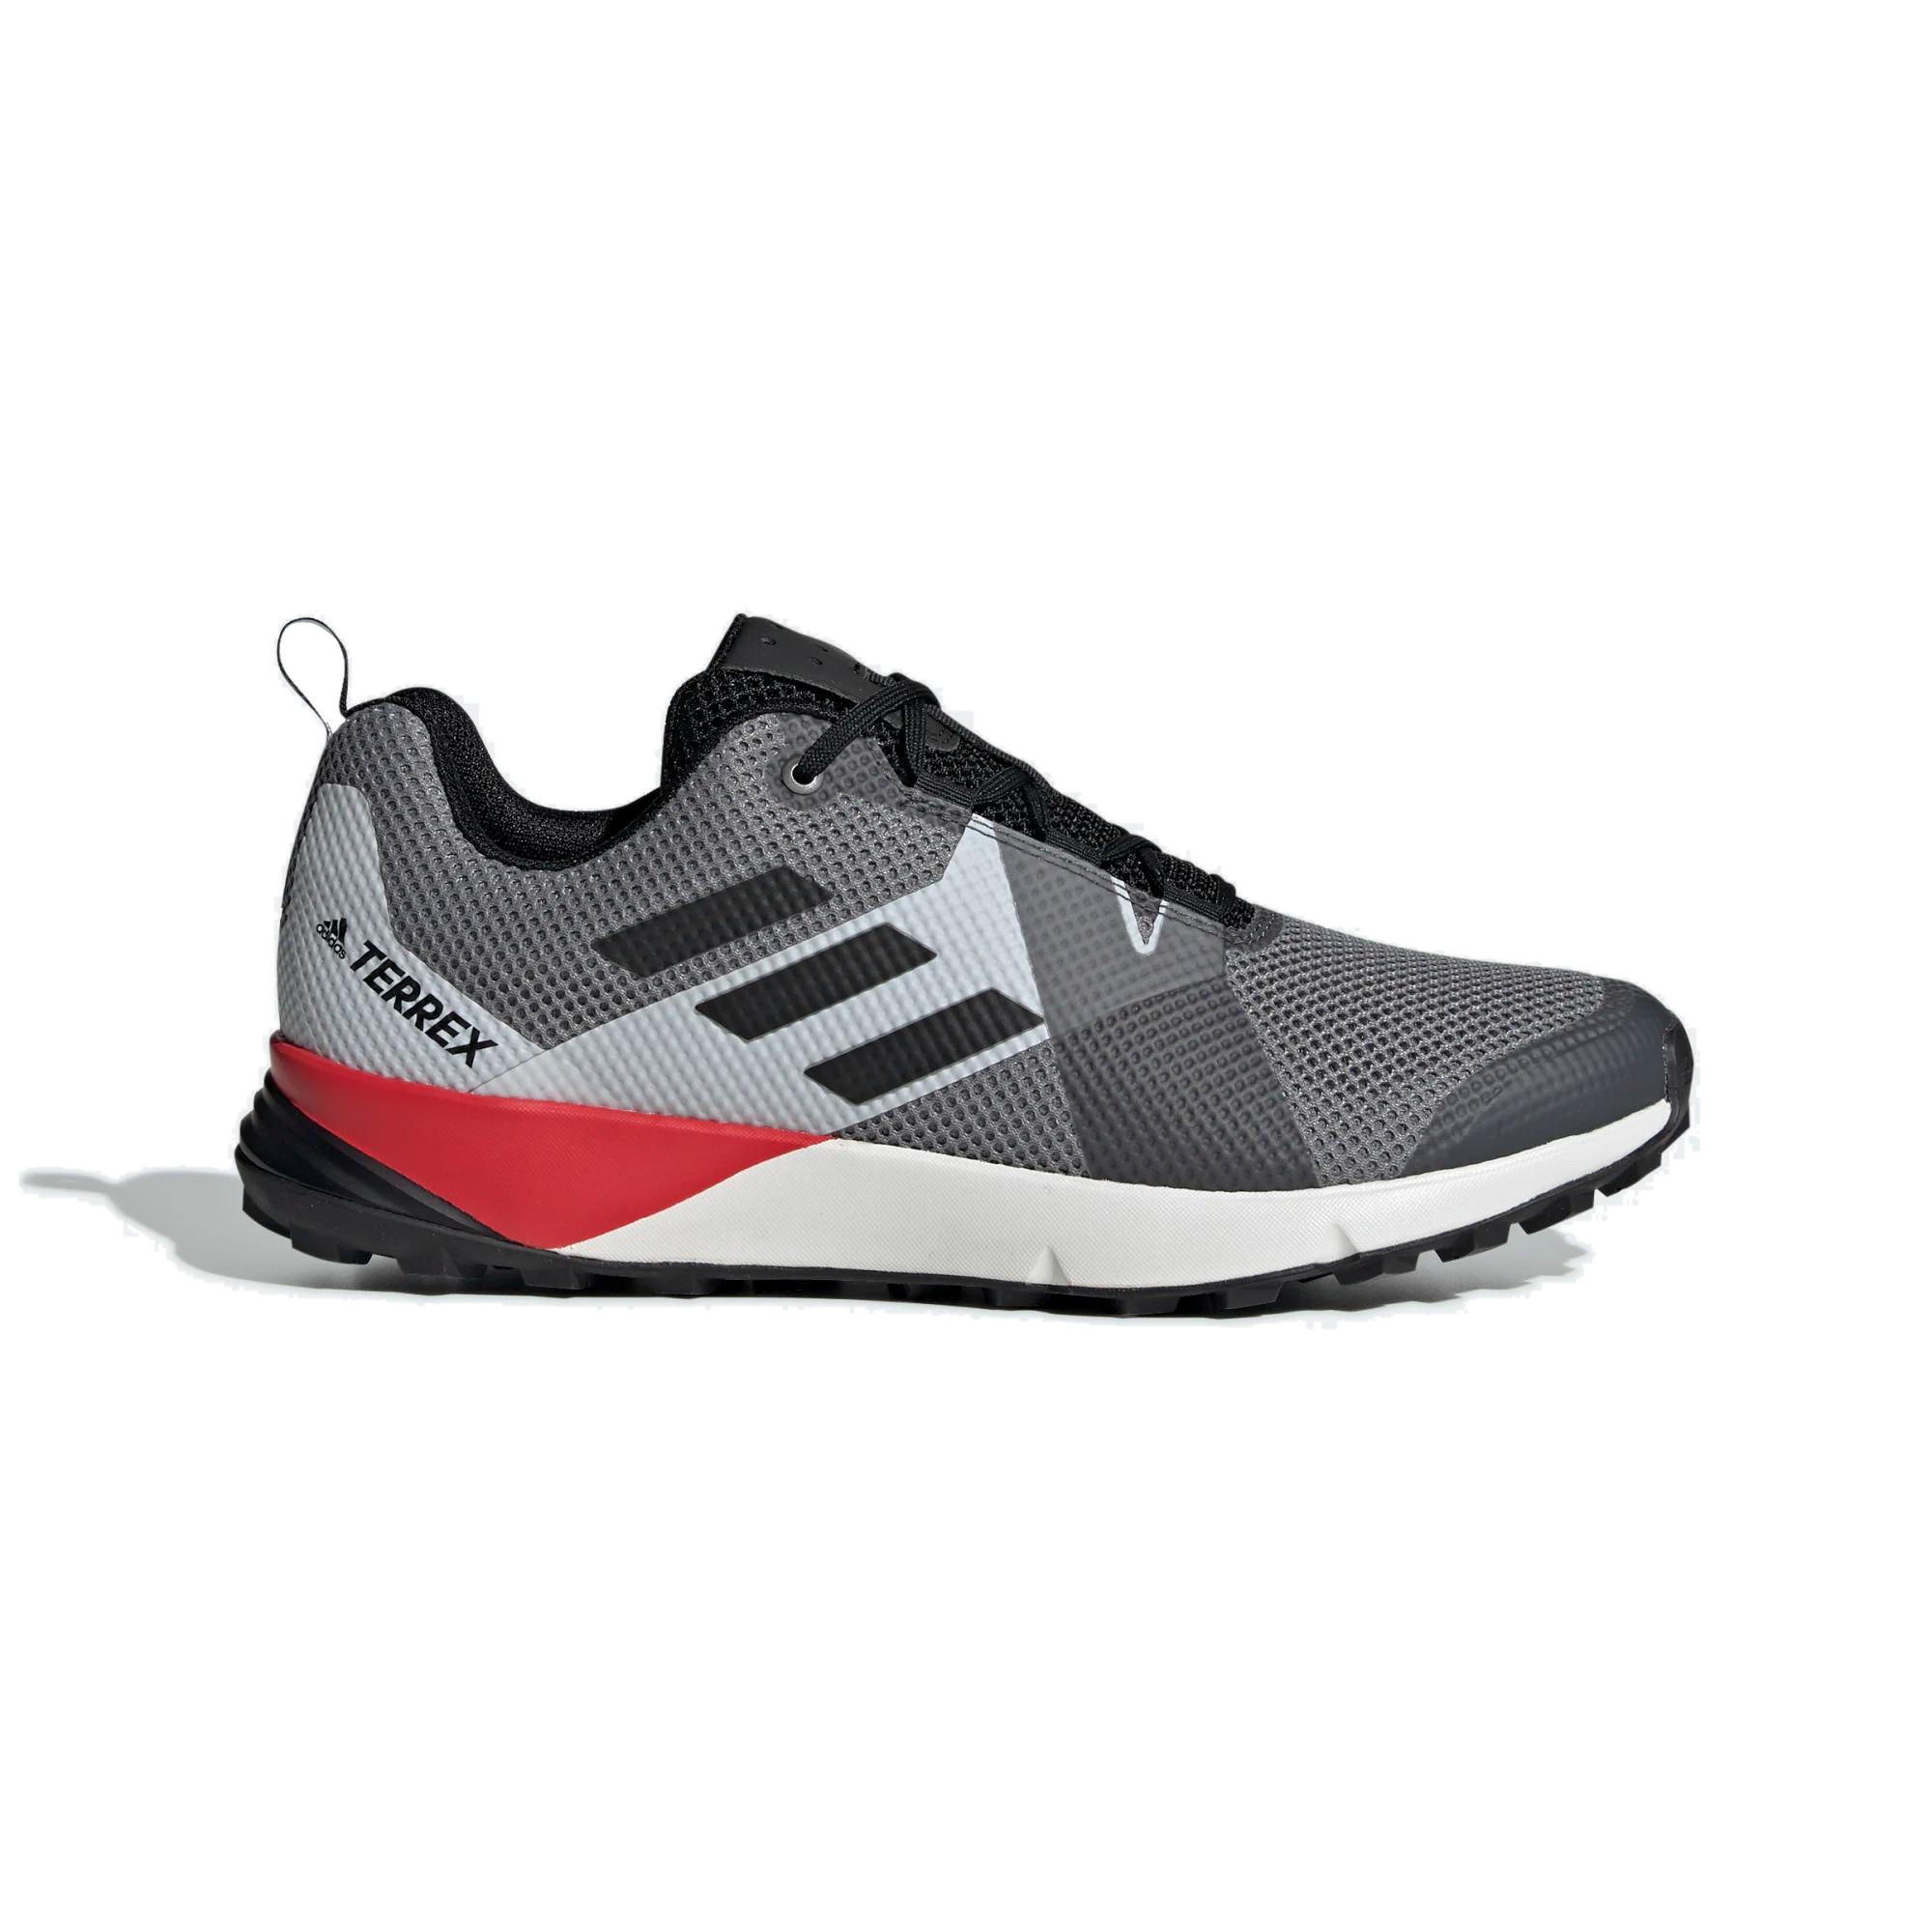 adidas terrex two trail running shoes